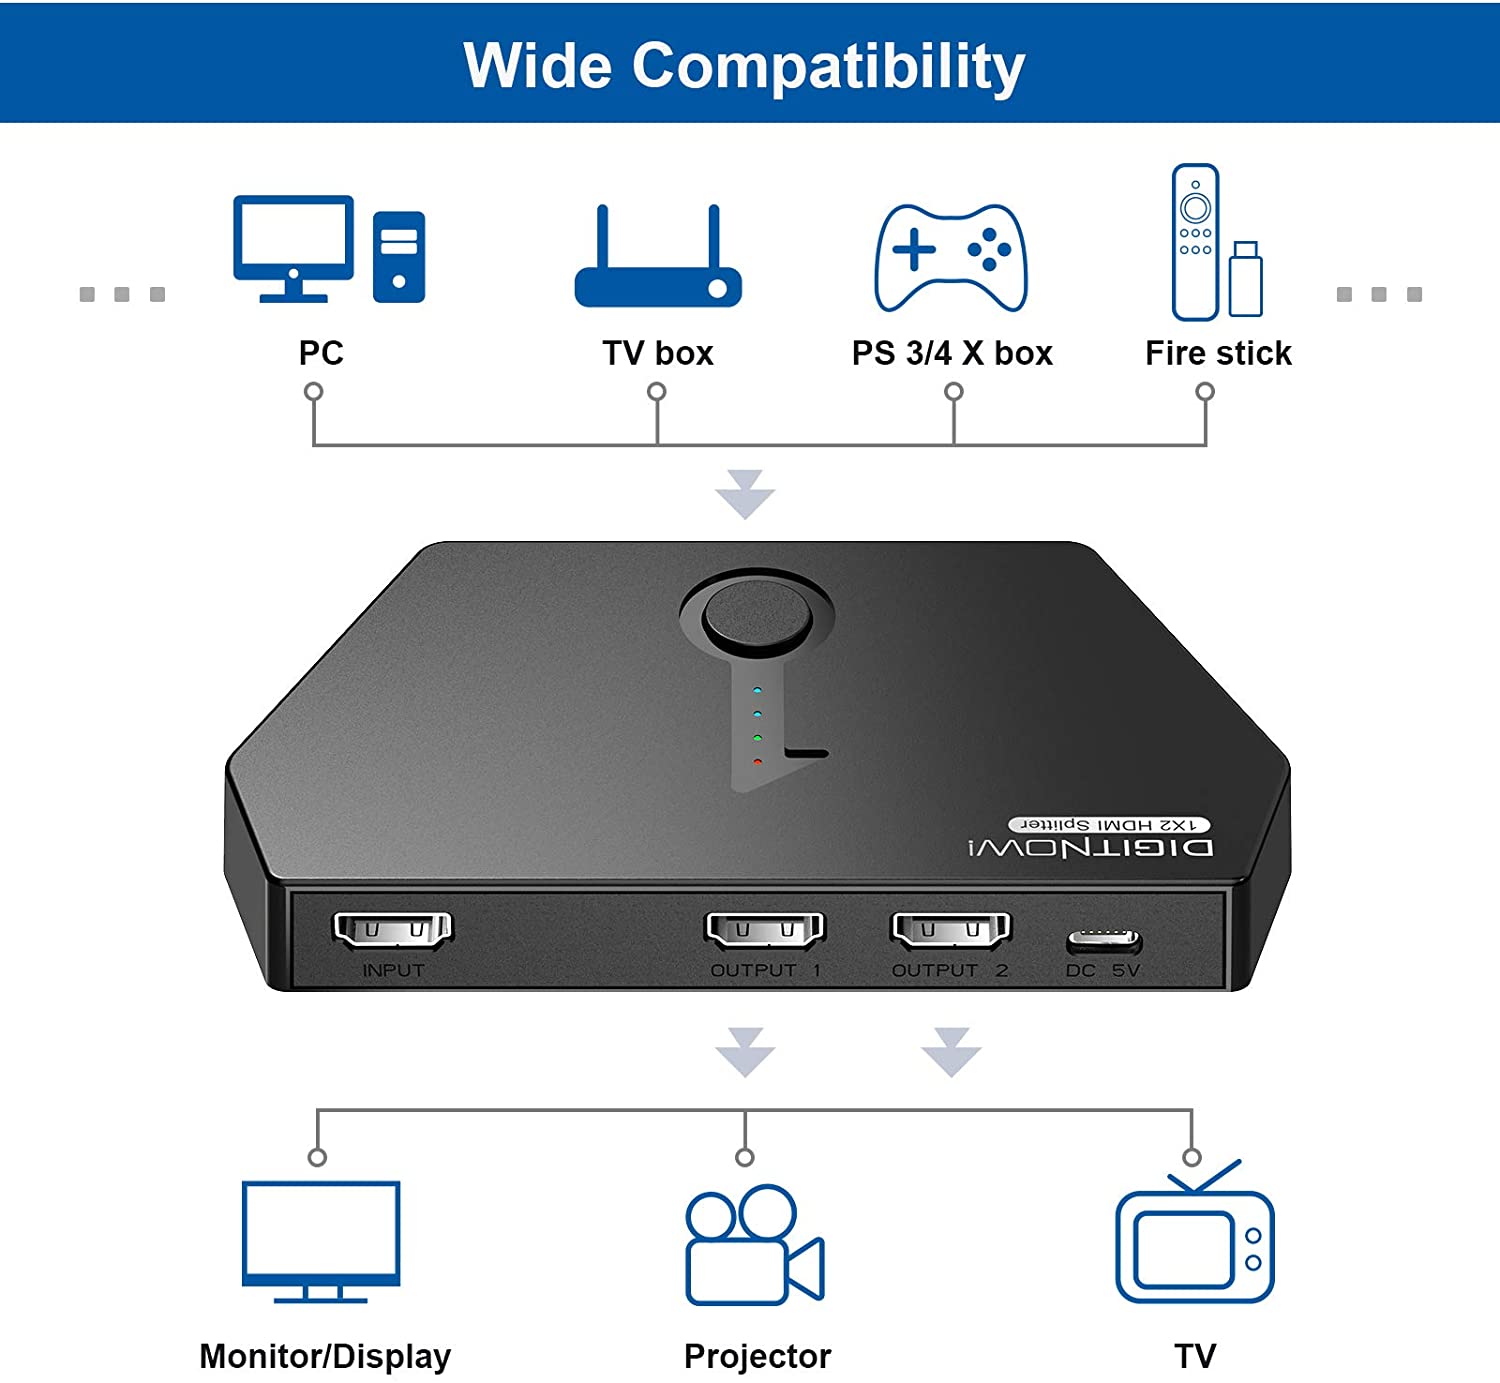 DIGITNOW HDMI Splitter 1 in 2 Out, 4K HDMI Ver1.4 HDCP, Powered HDMI Splitter Supports 3D 4K@30HZ Full HD1080P for Xbox PS4 DVD Players Apple TV Blu-Ray Player Fire Stick